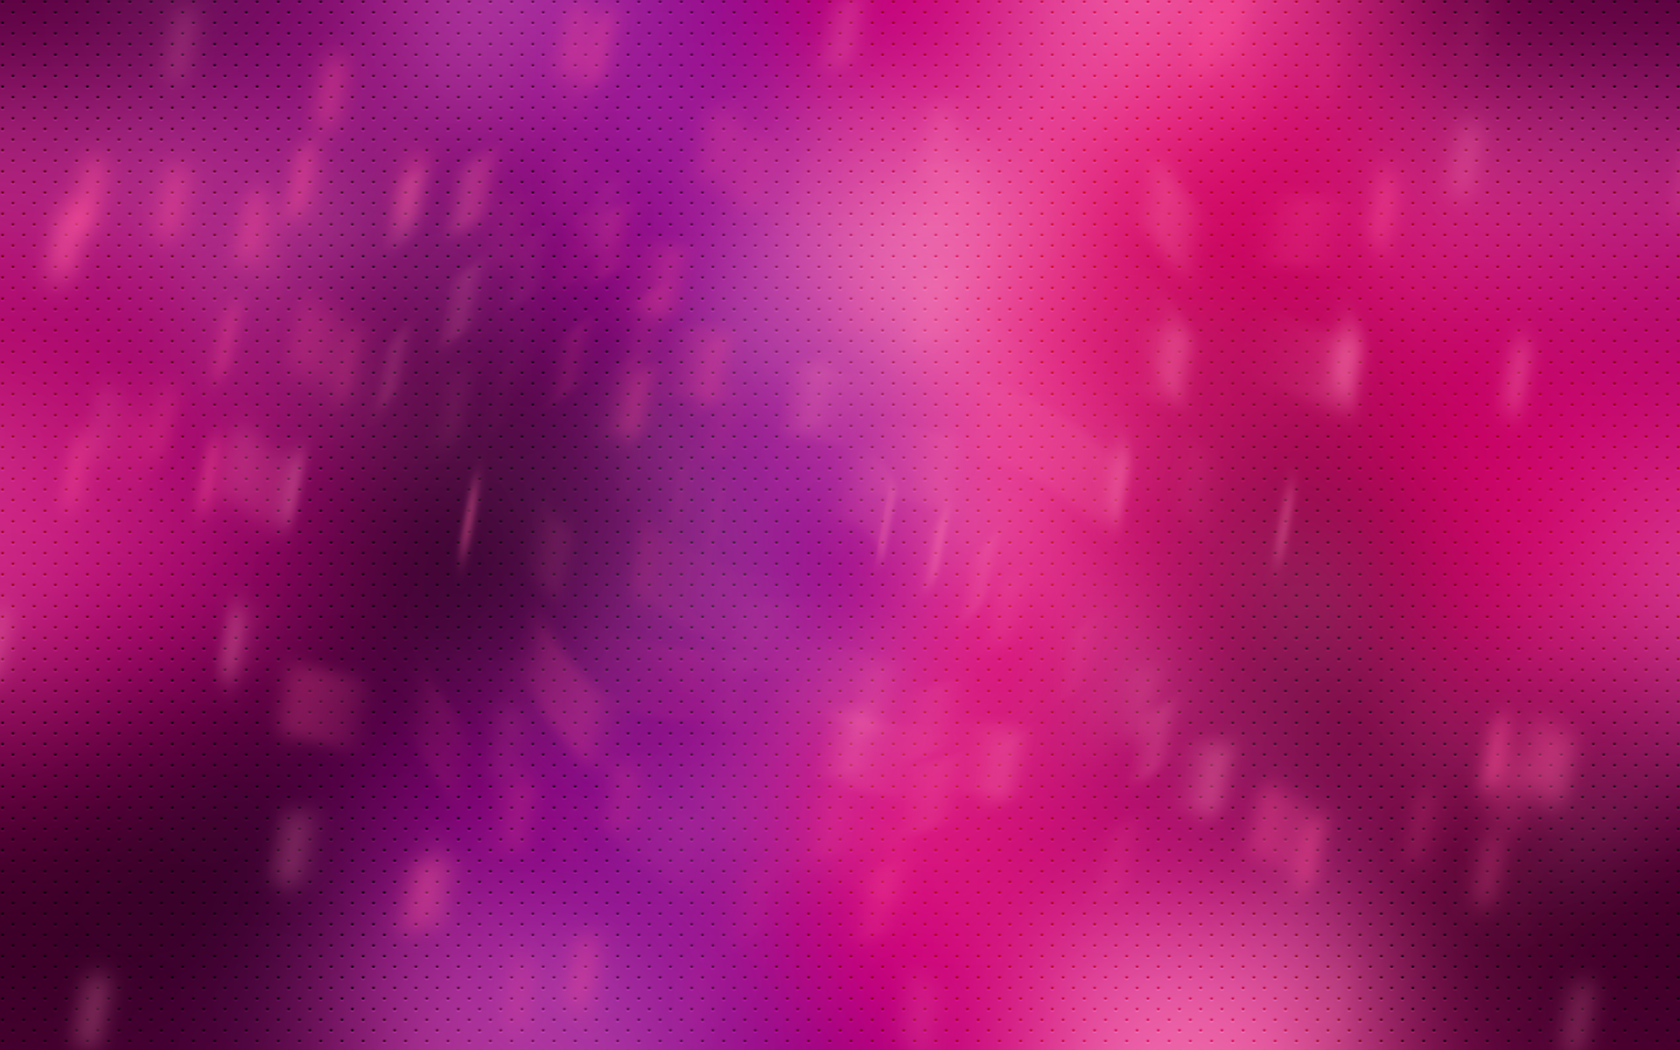 Full HD Wallpapers + Backgrounds, Pink, Purple